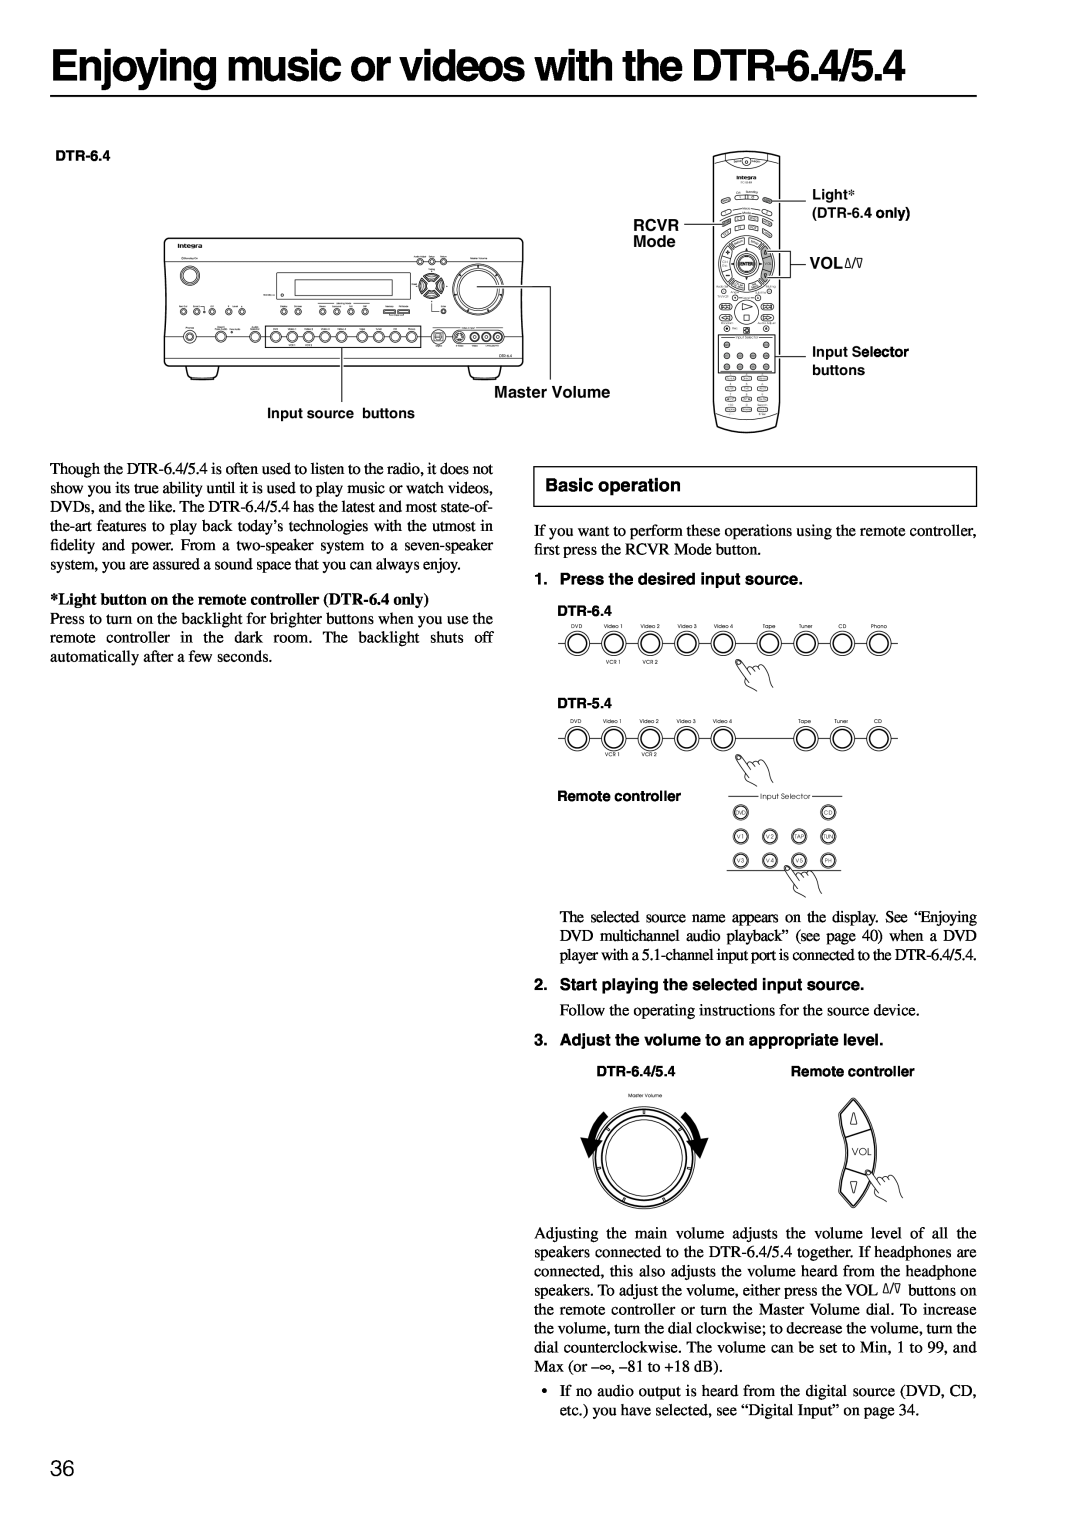 Integra instruction manual Enjoying music or videos with the DTR-6.4/5.4, Basic operation 